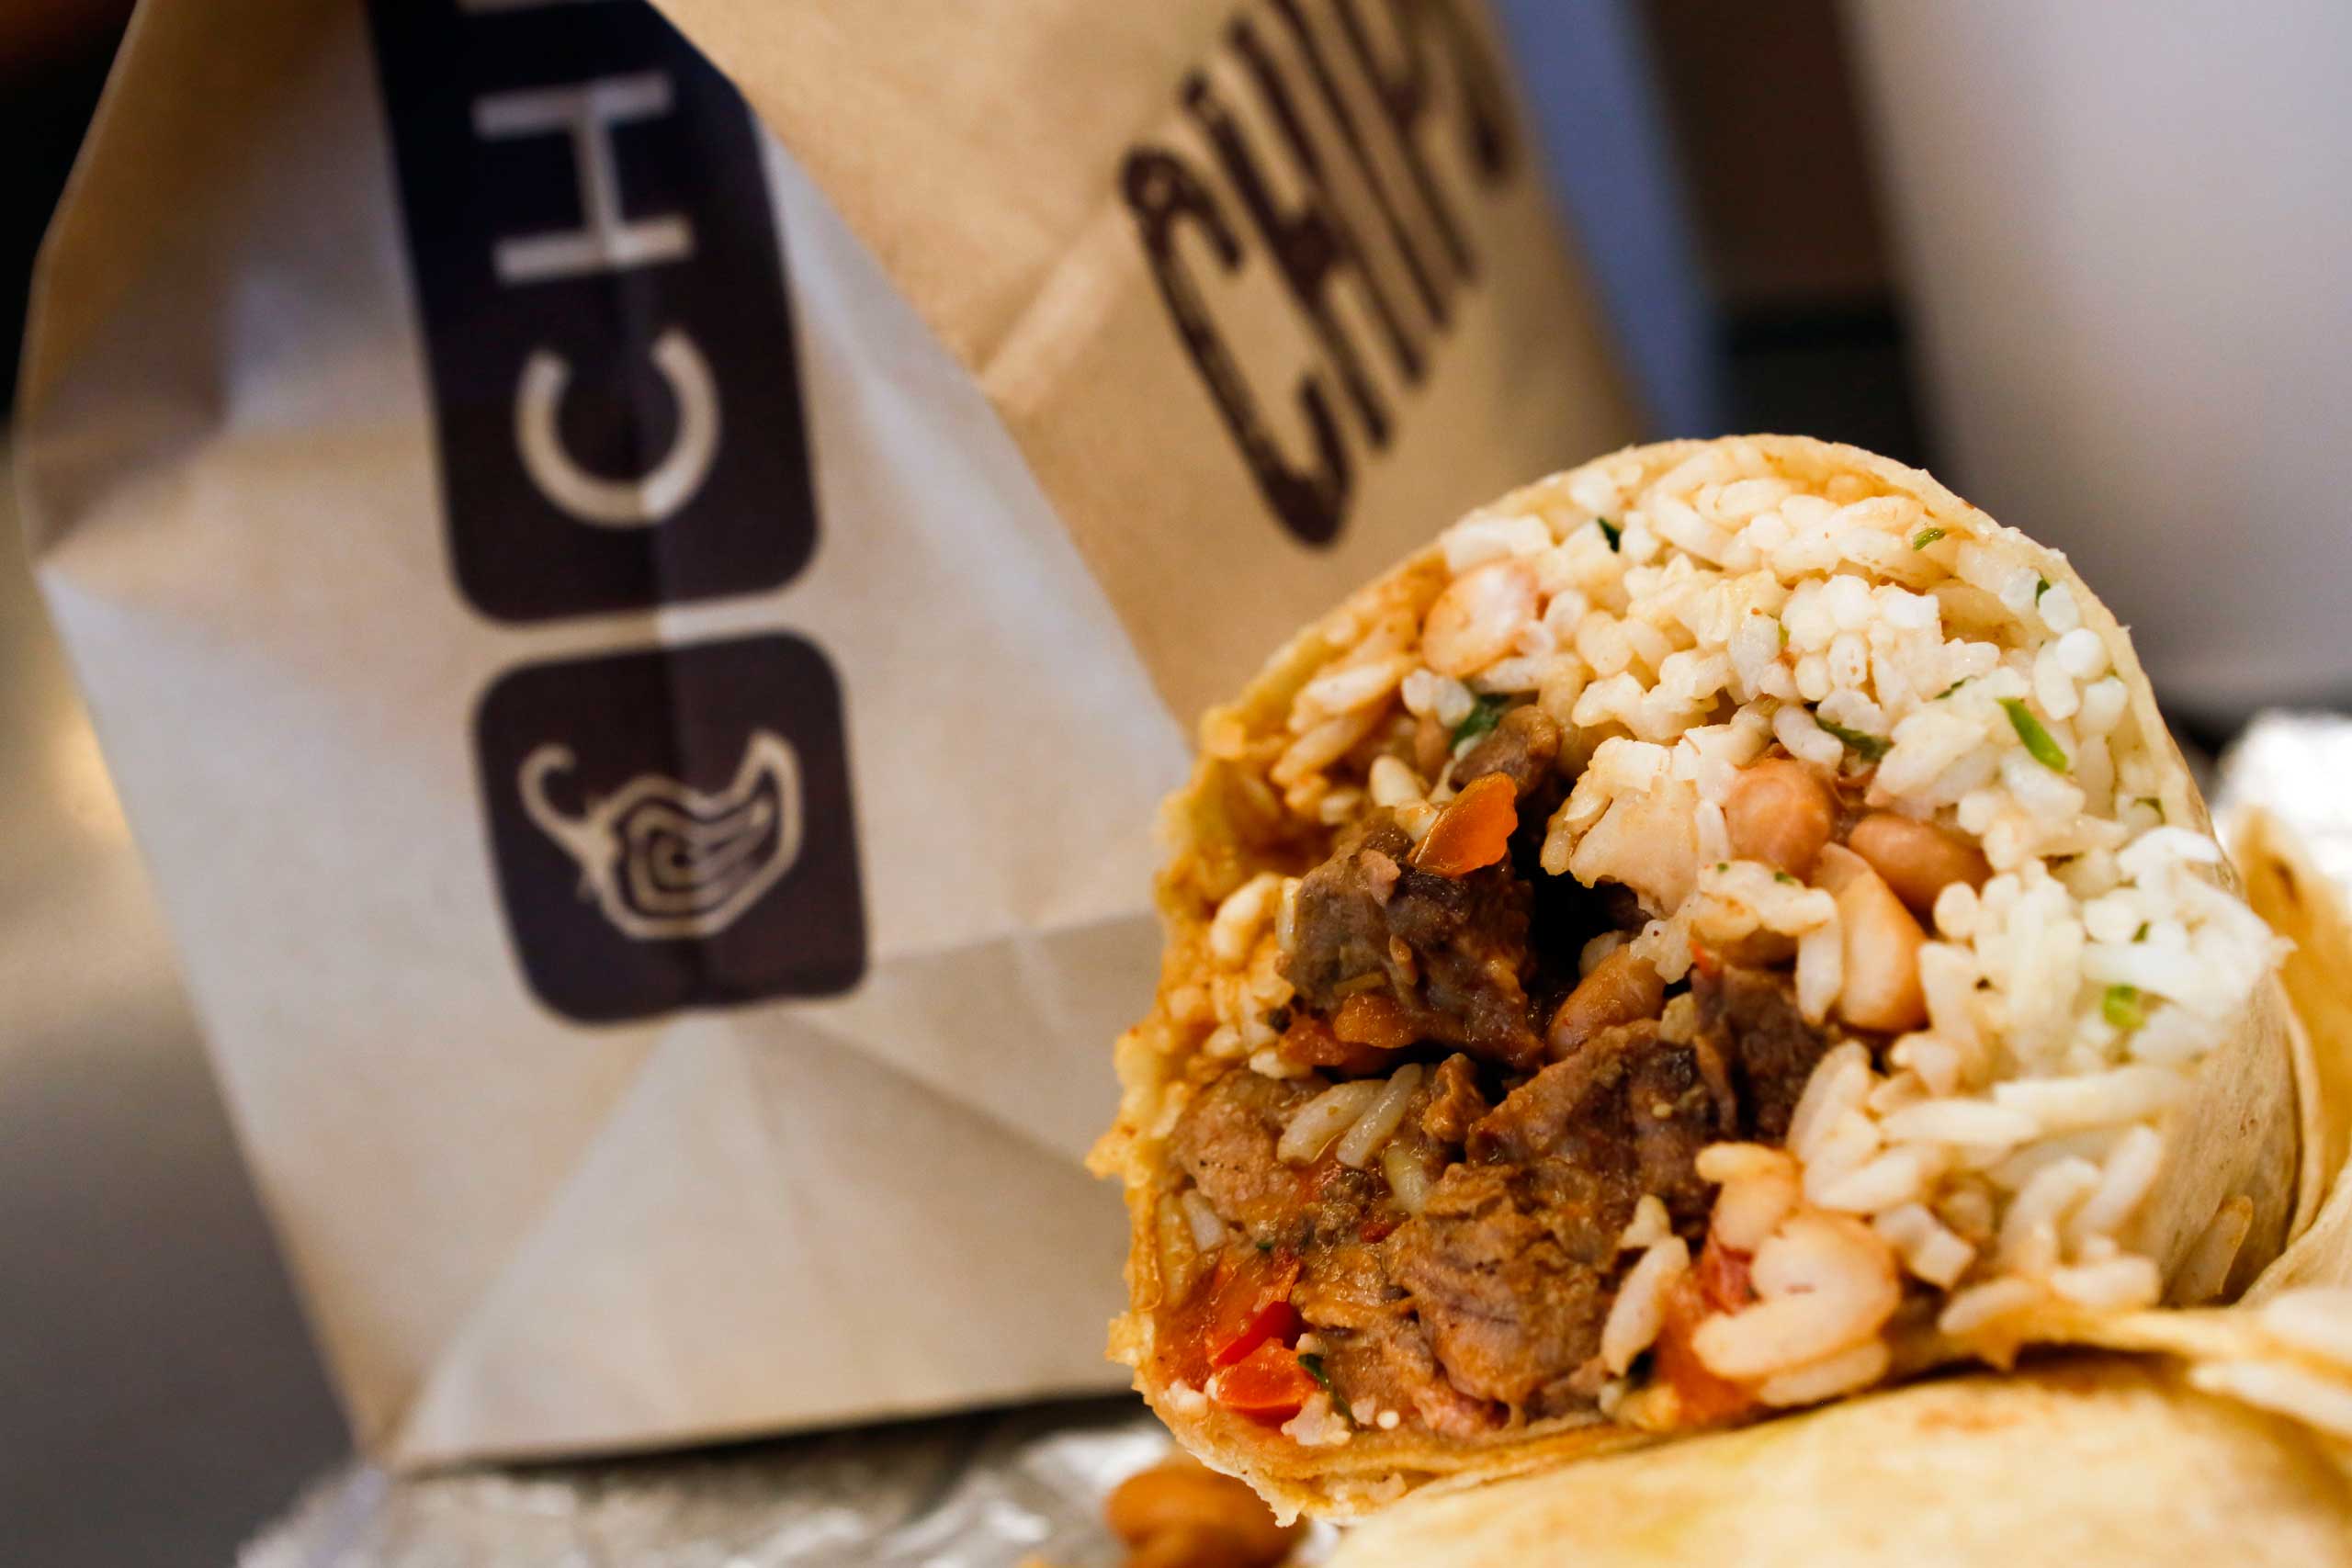 A steak burrito at Chipotle Mexican Grill in Hollywood, Calif. (Patrick T. Fallon—Bloomberg/Getty Images)